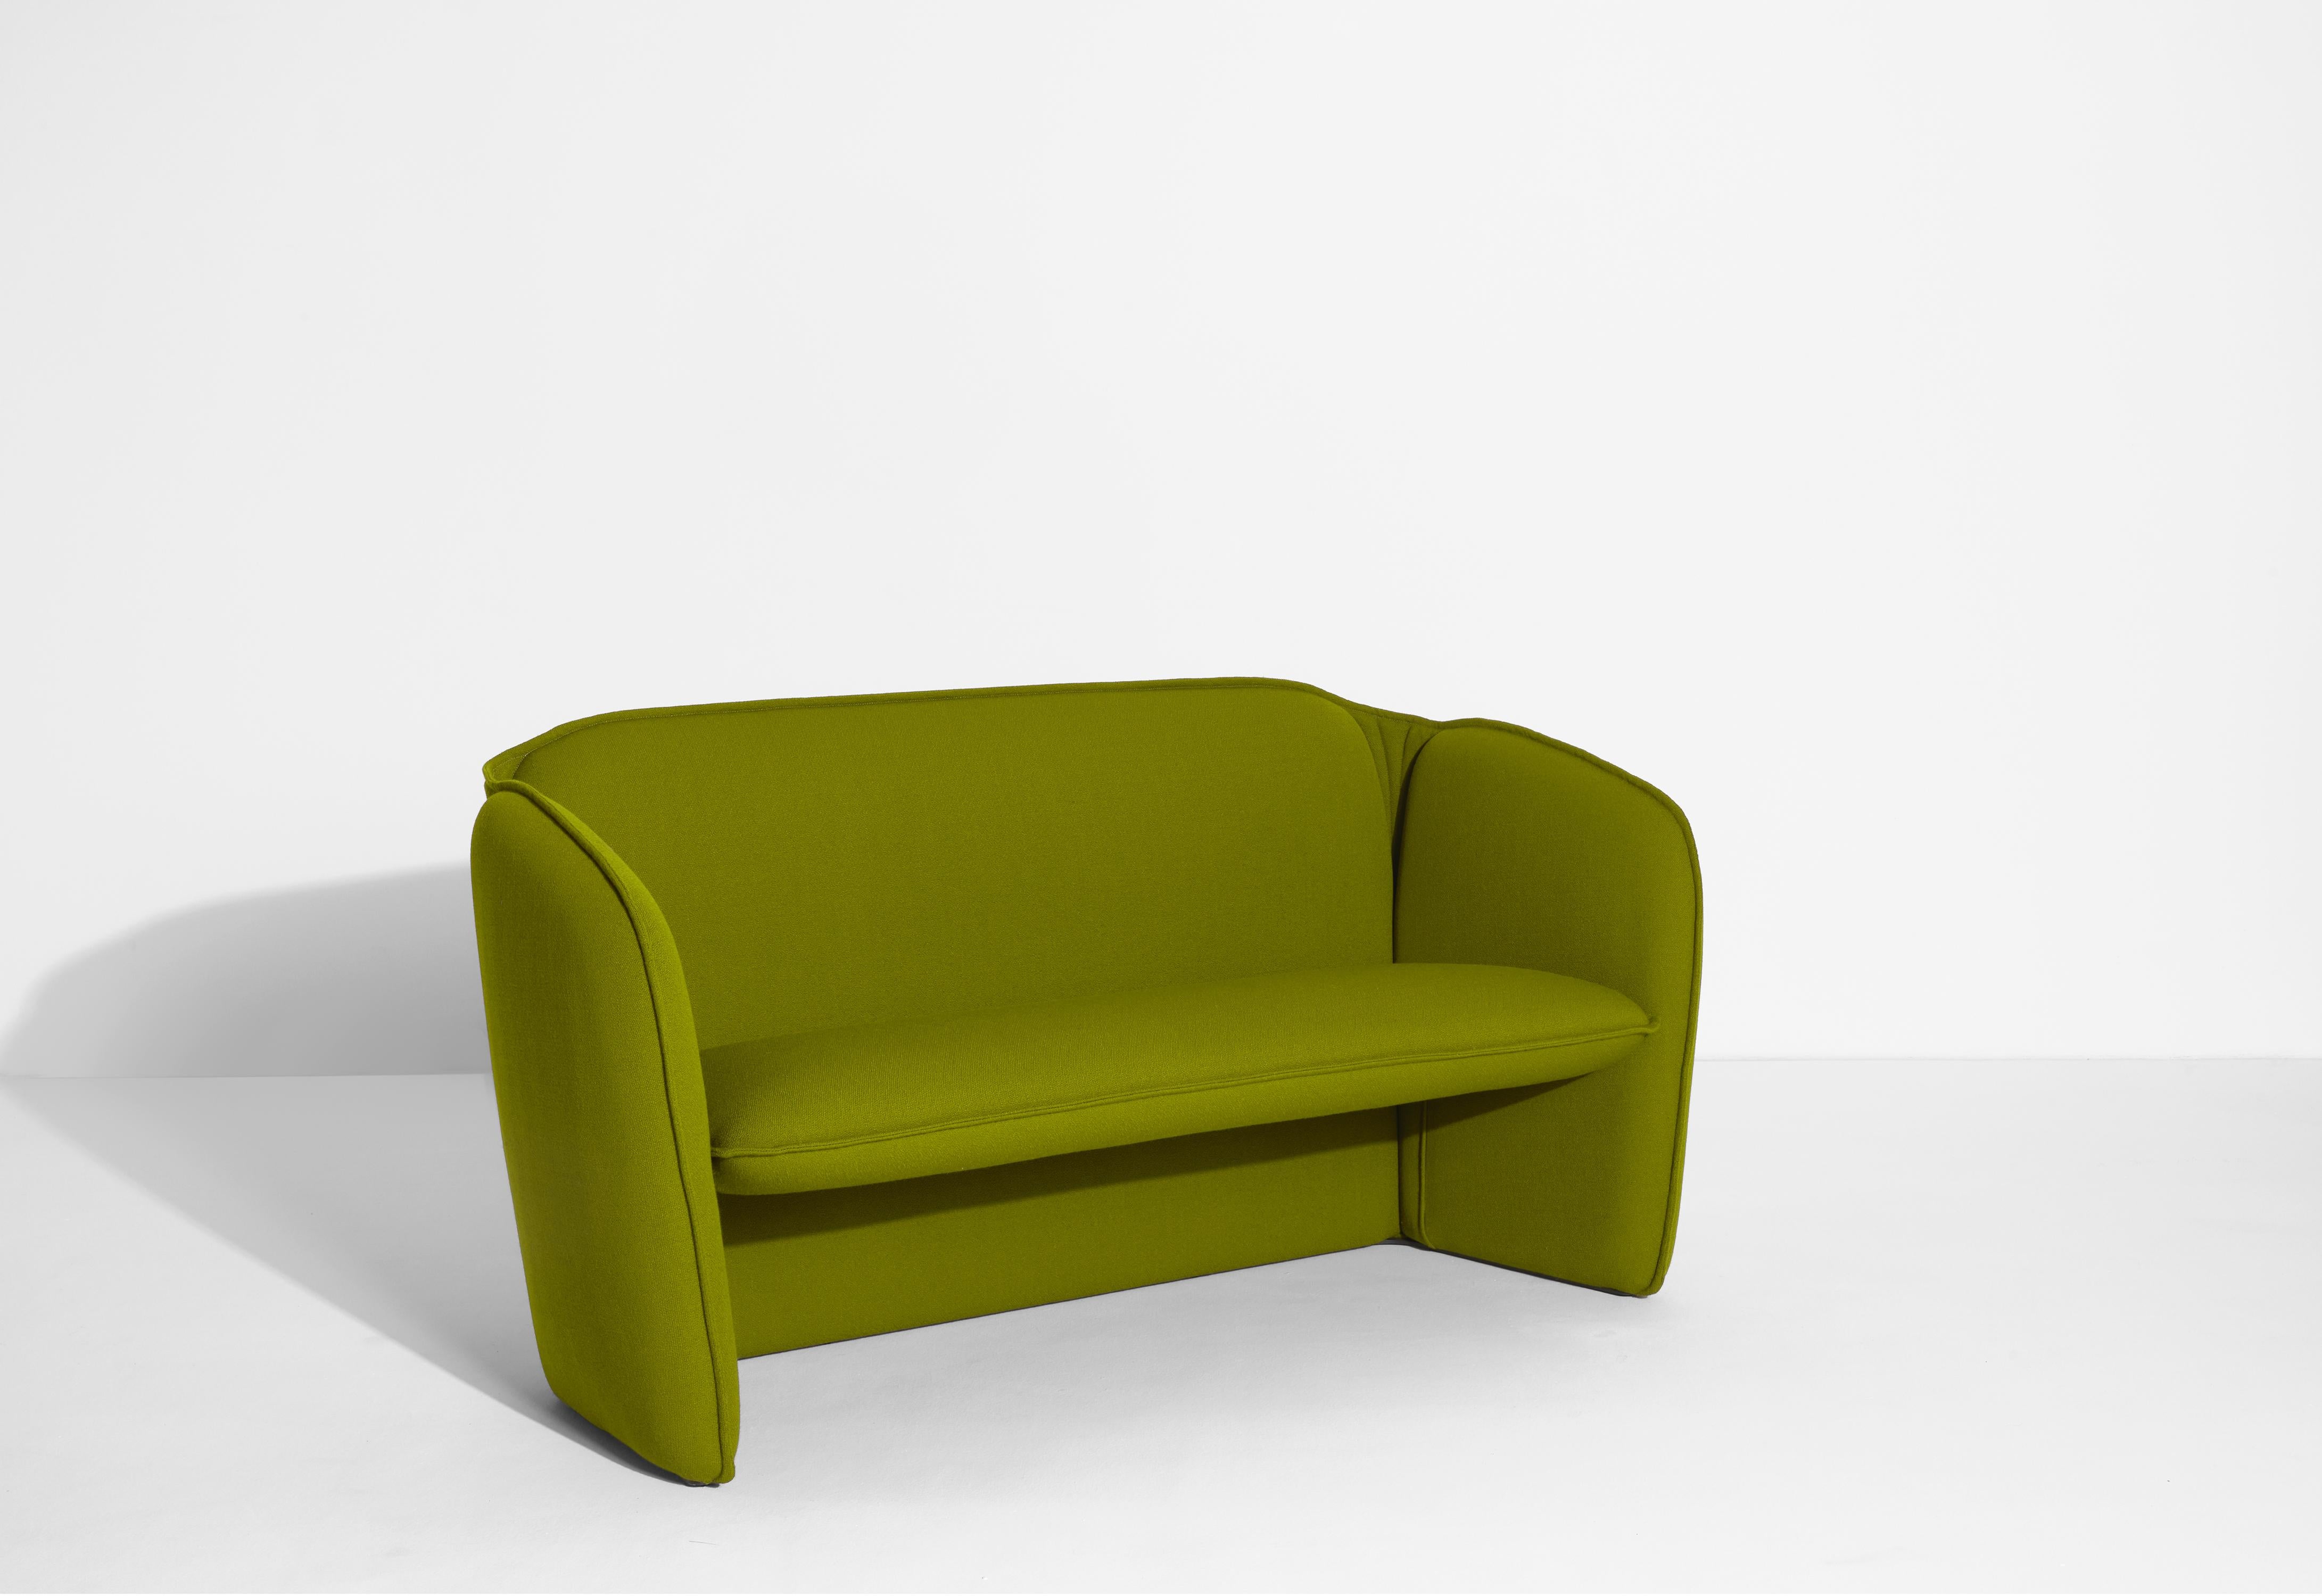 Petite Friture Lily Sofa in Olive Green by Färg & Blanche, 2022 For Sale 1